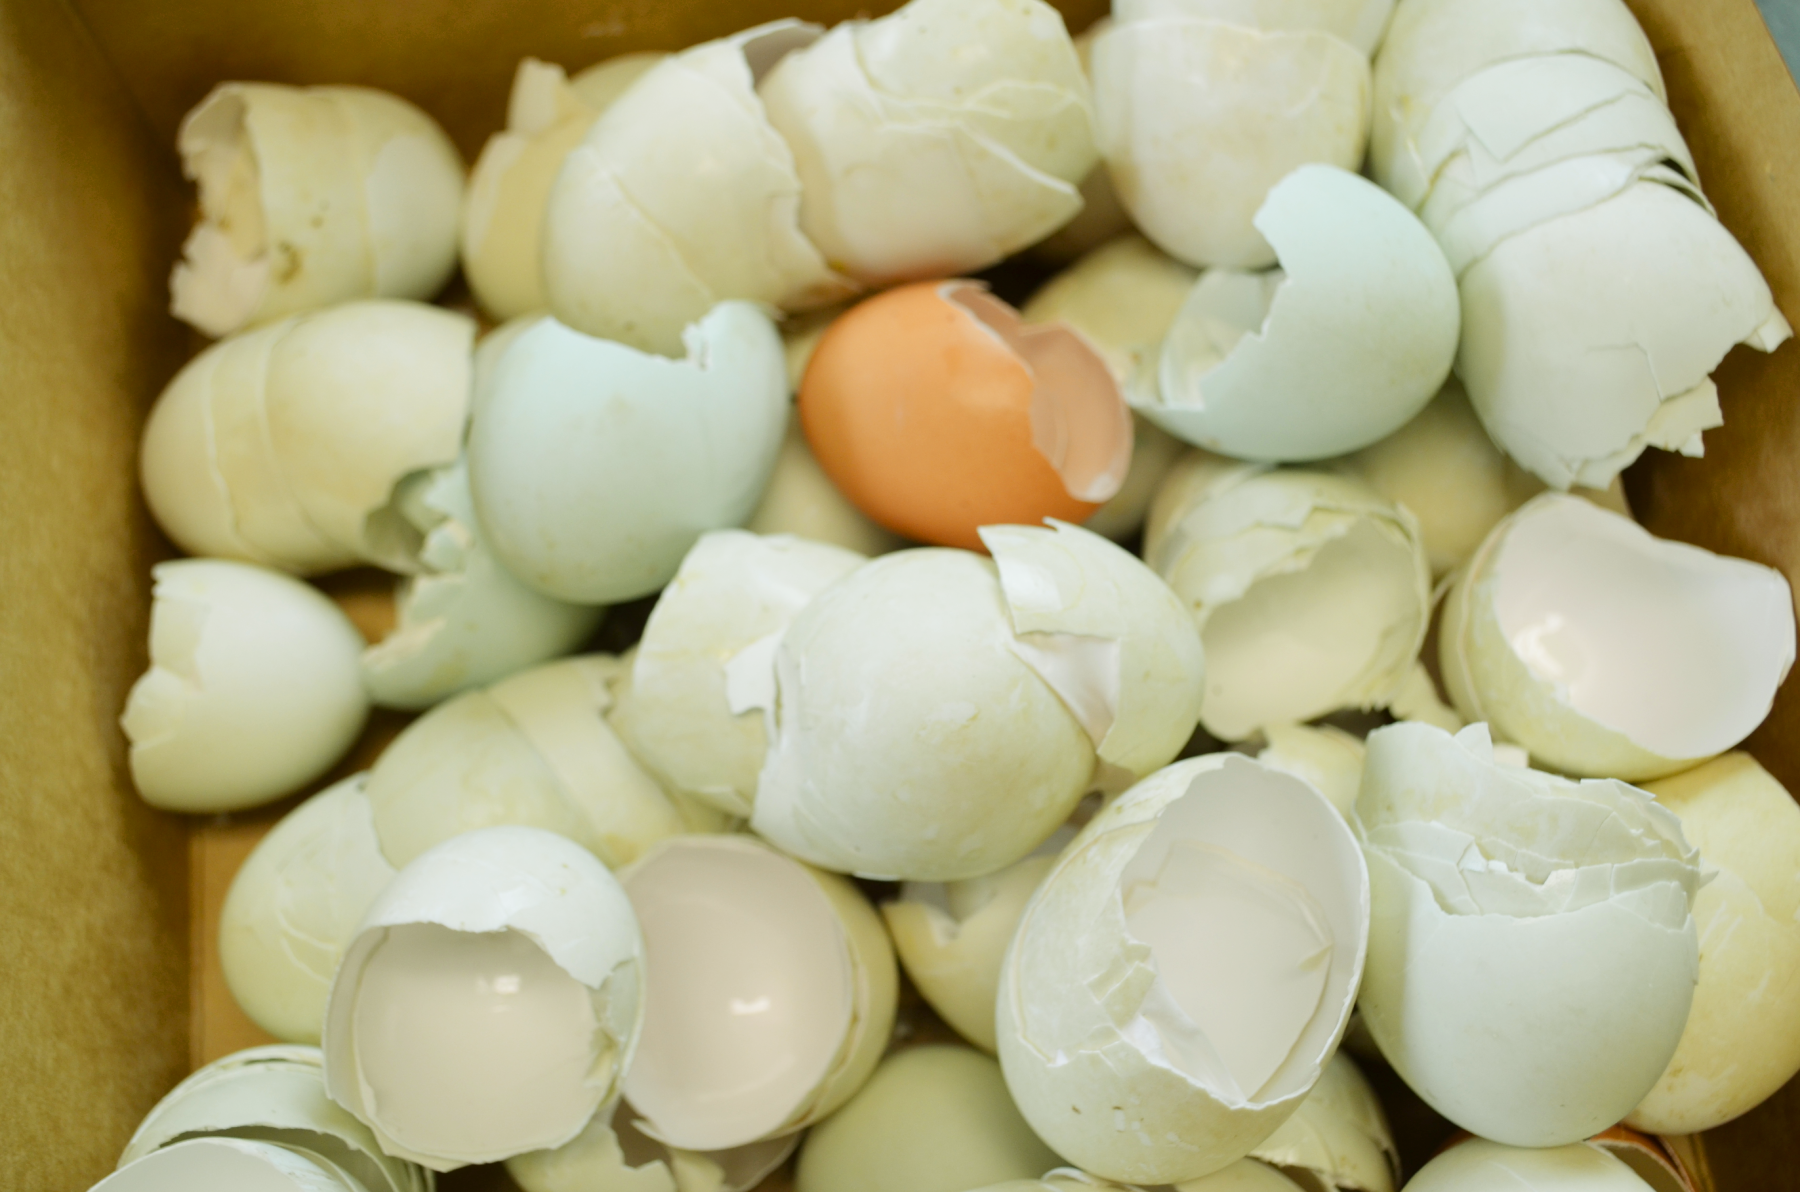 eggshells in a box for planting tomatoes